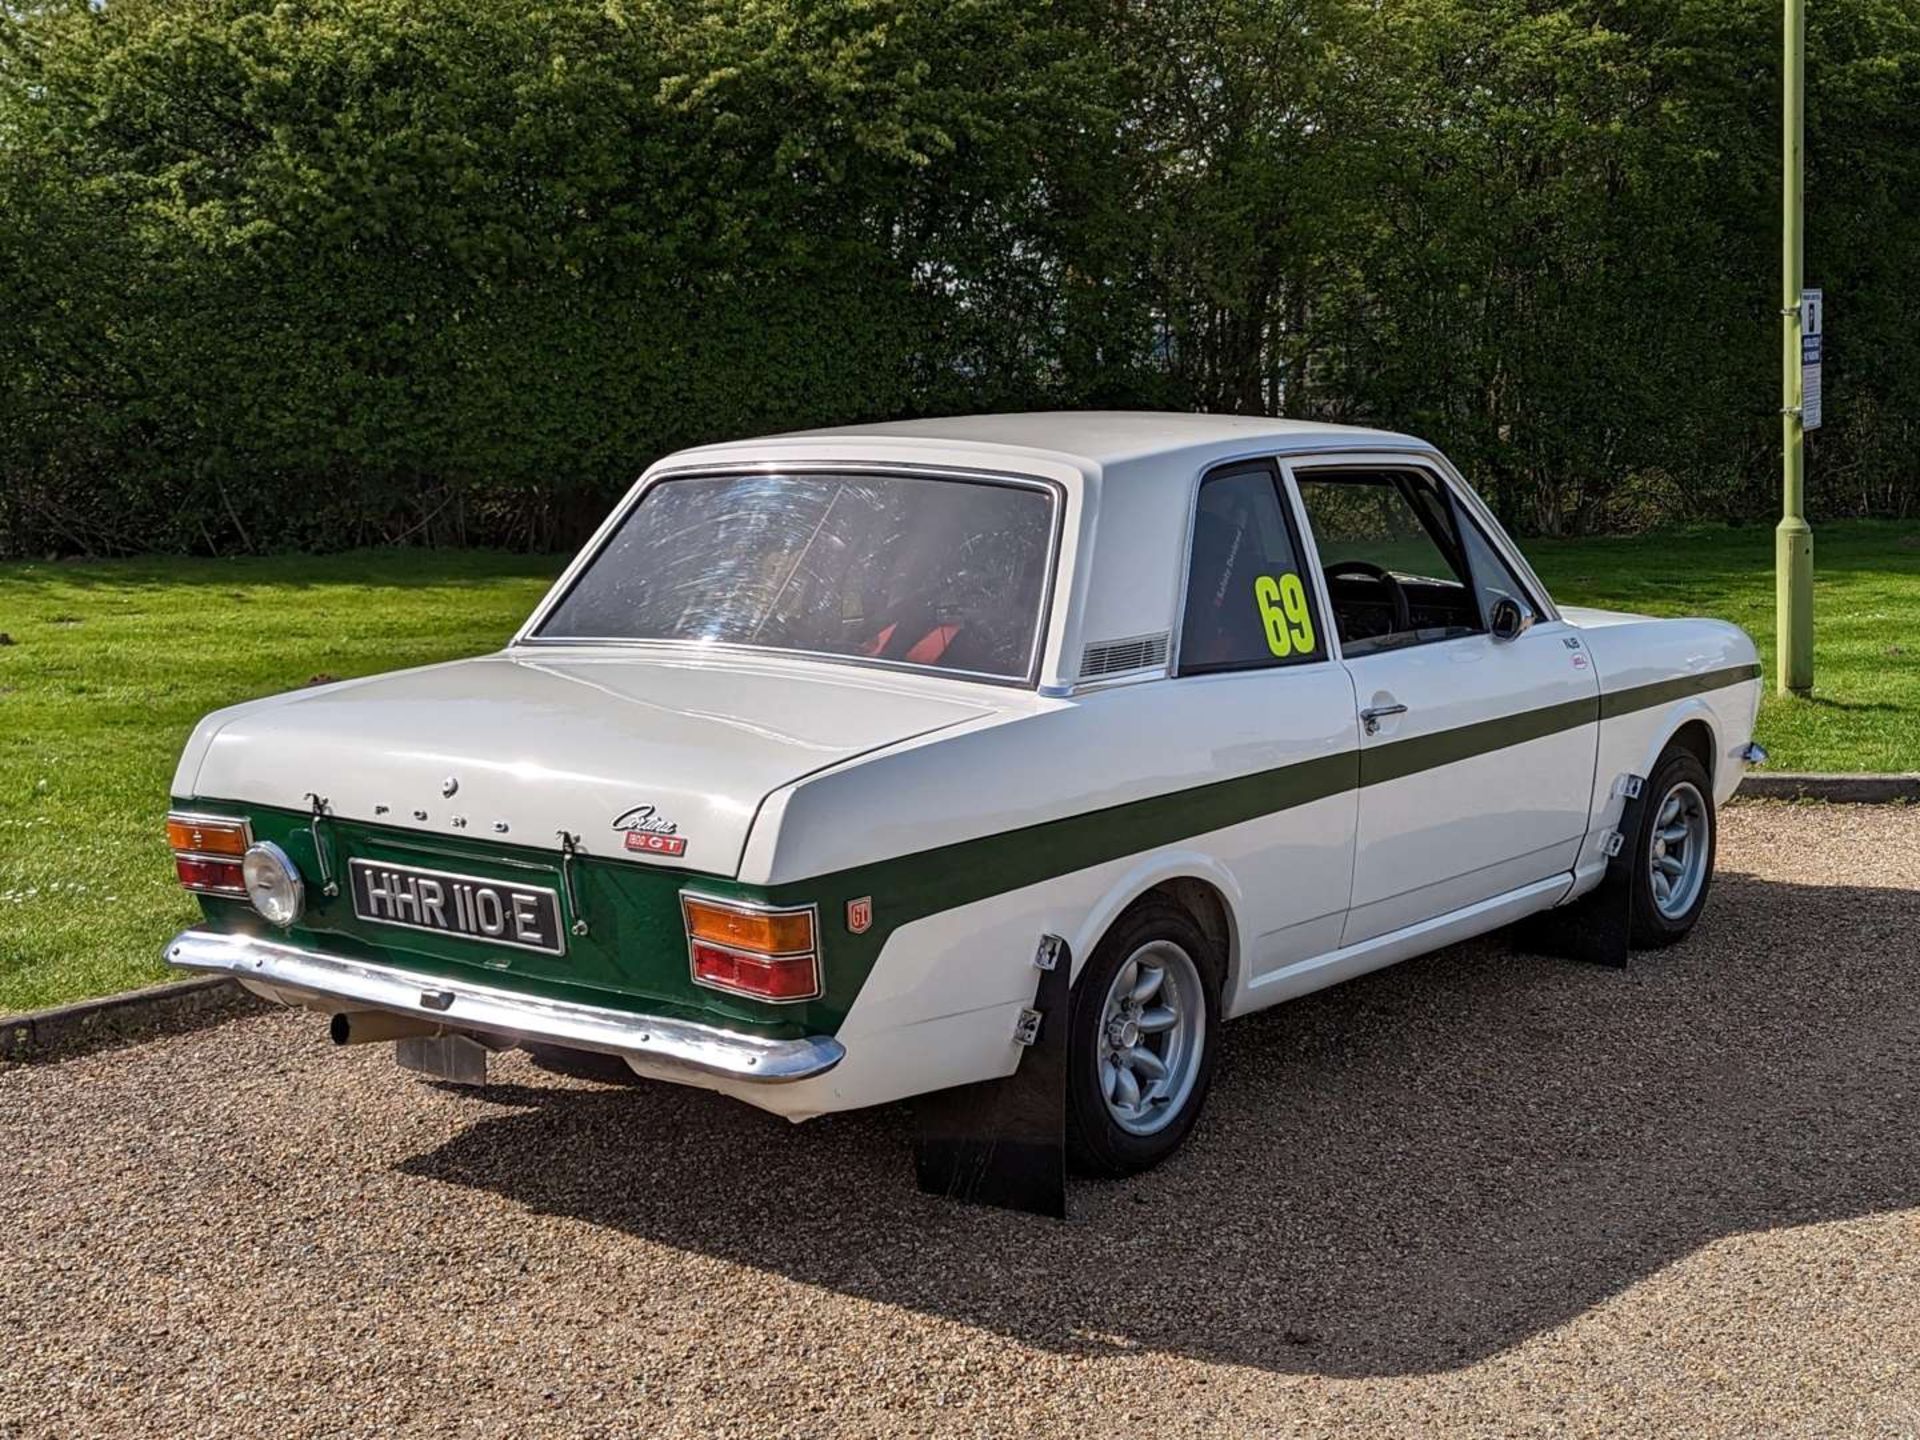 1967 FORD CORTINA MKII&nbsp; - Image 7 of 30